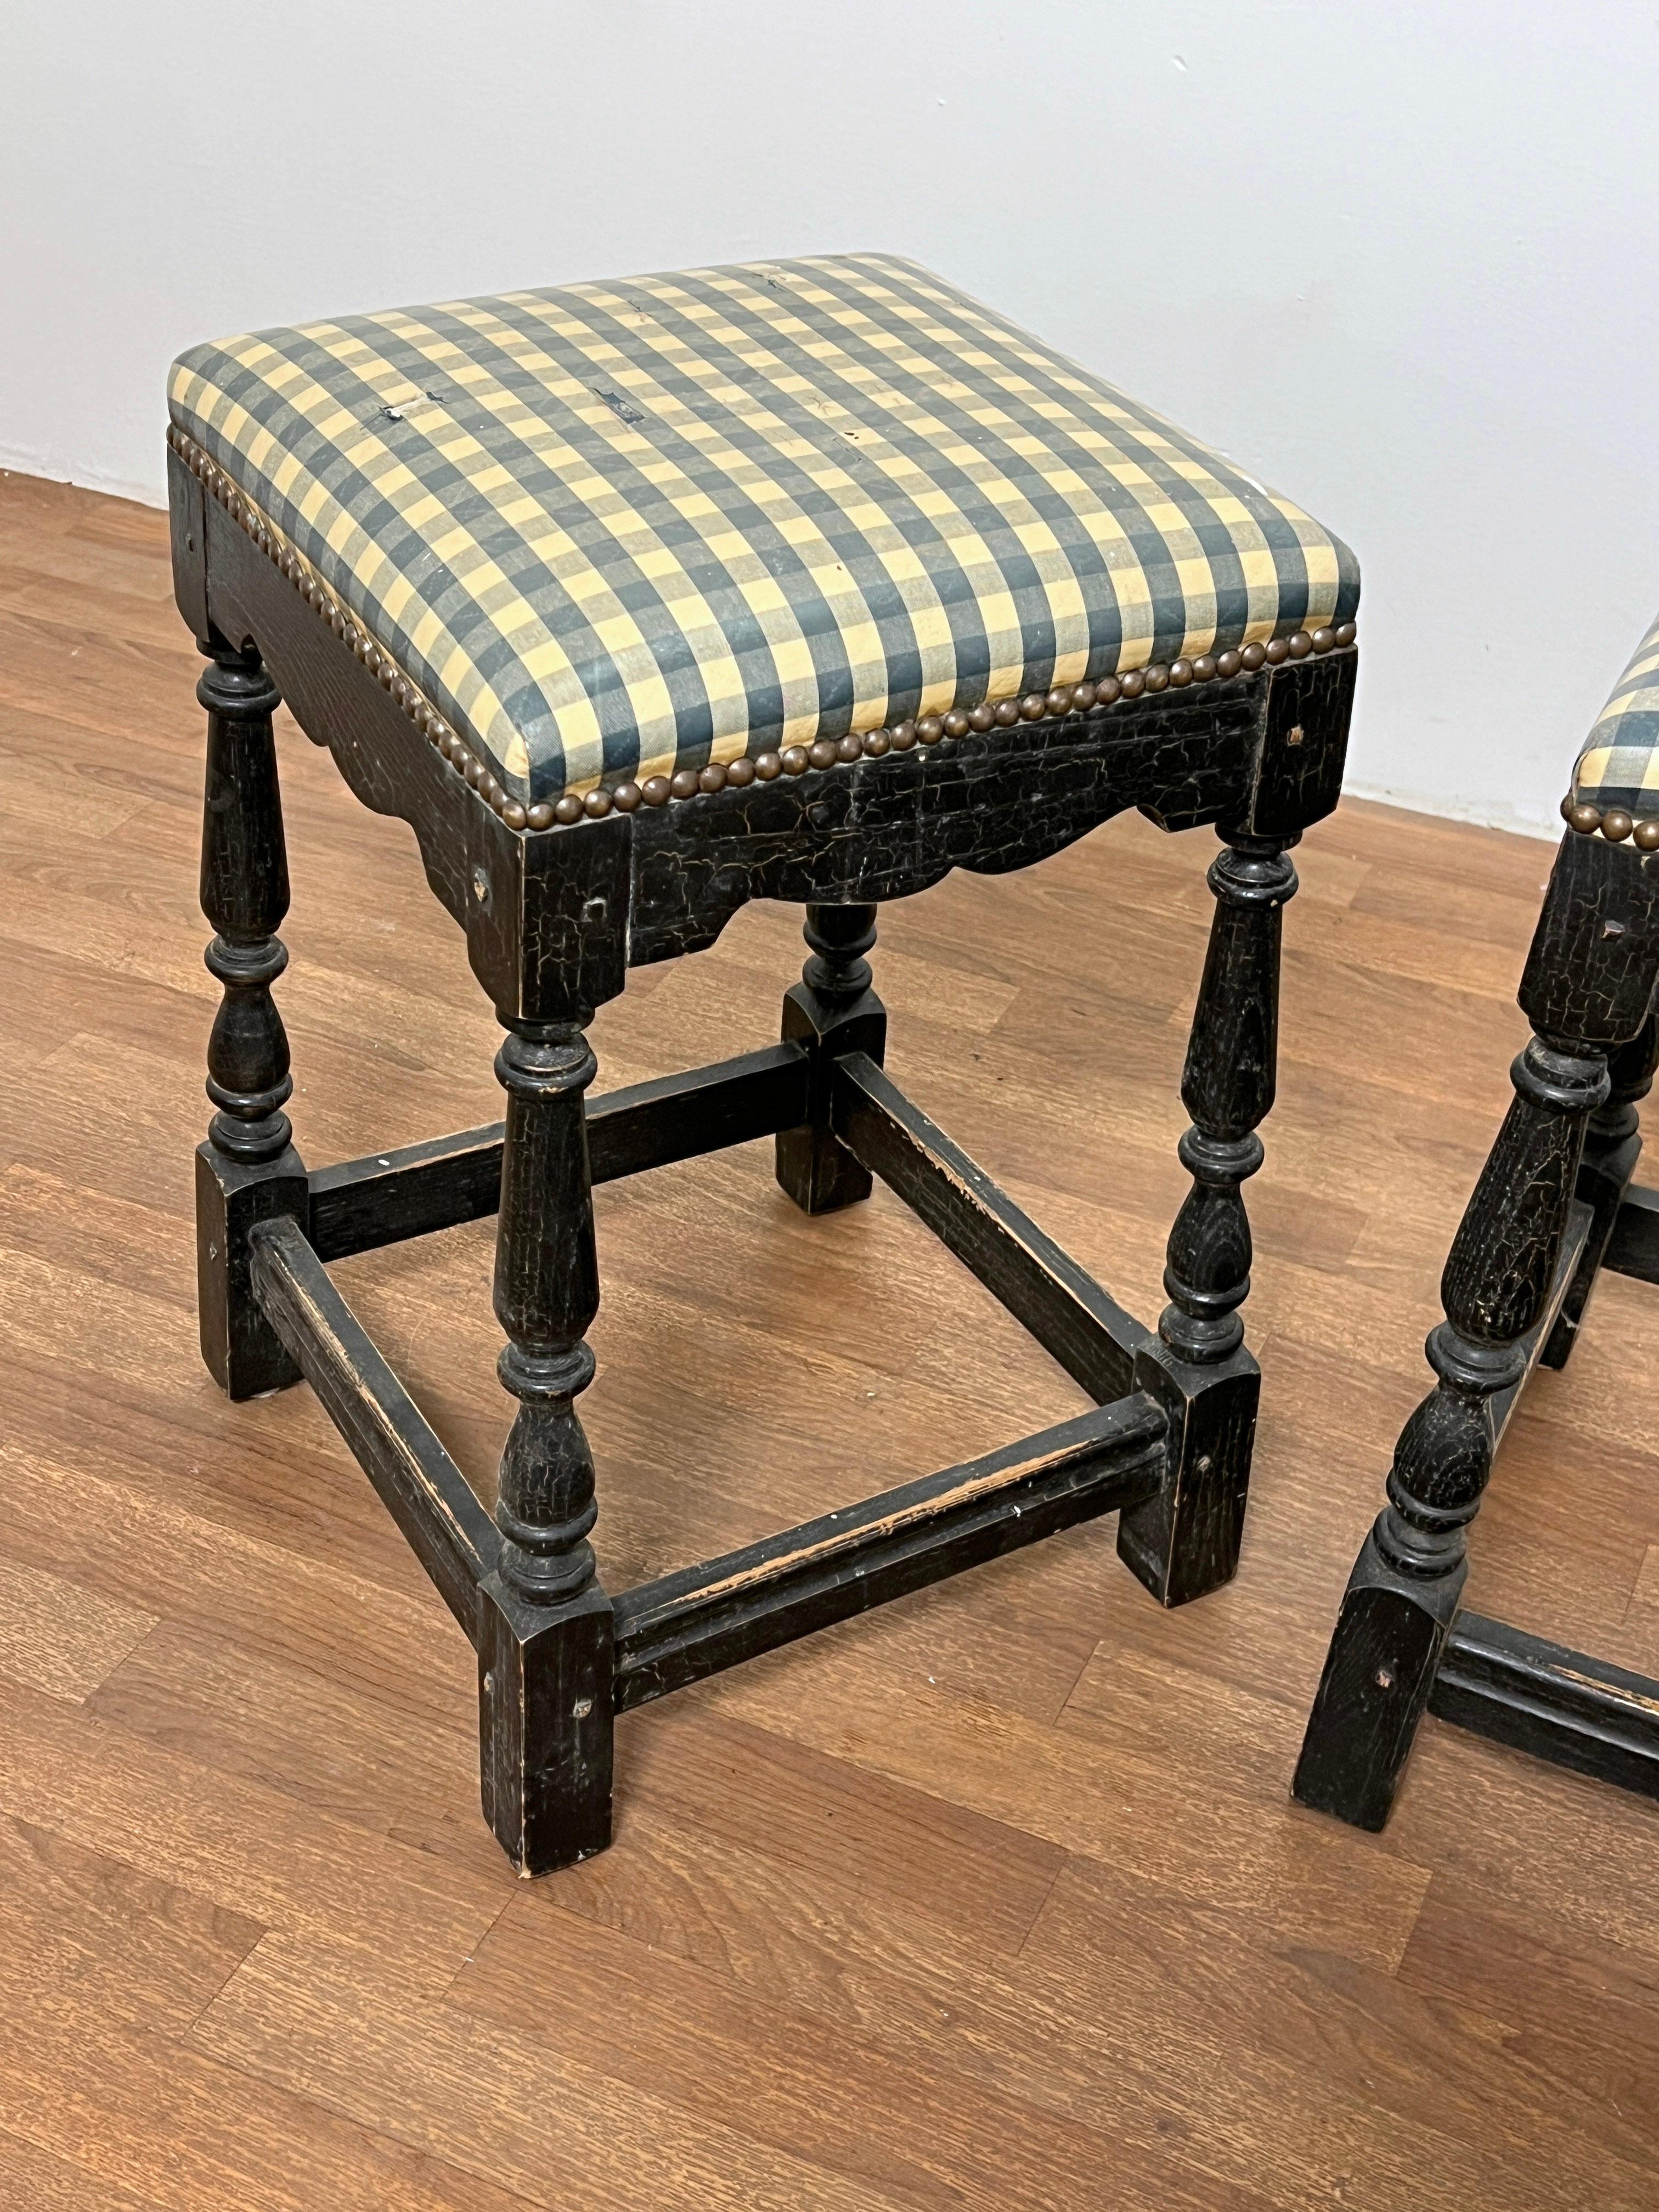 Set of three French Country style stools with turned wood frames and nailhead accents by Minton-Spidell, 23.5